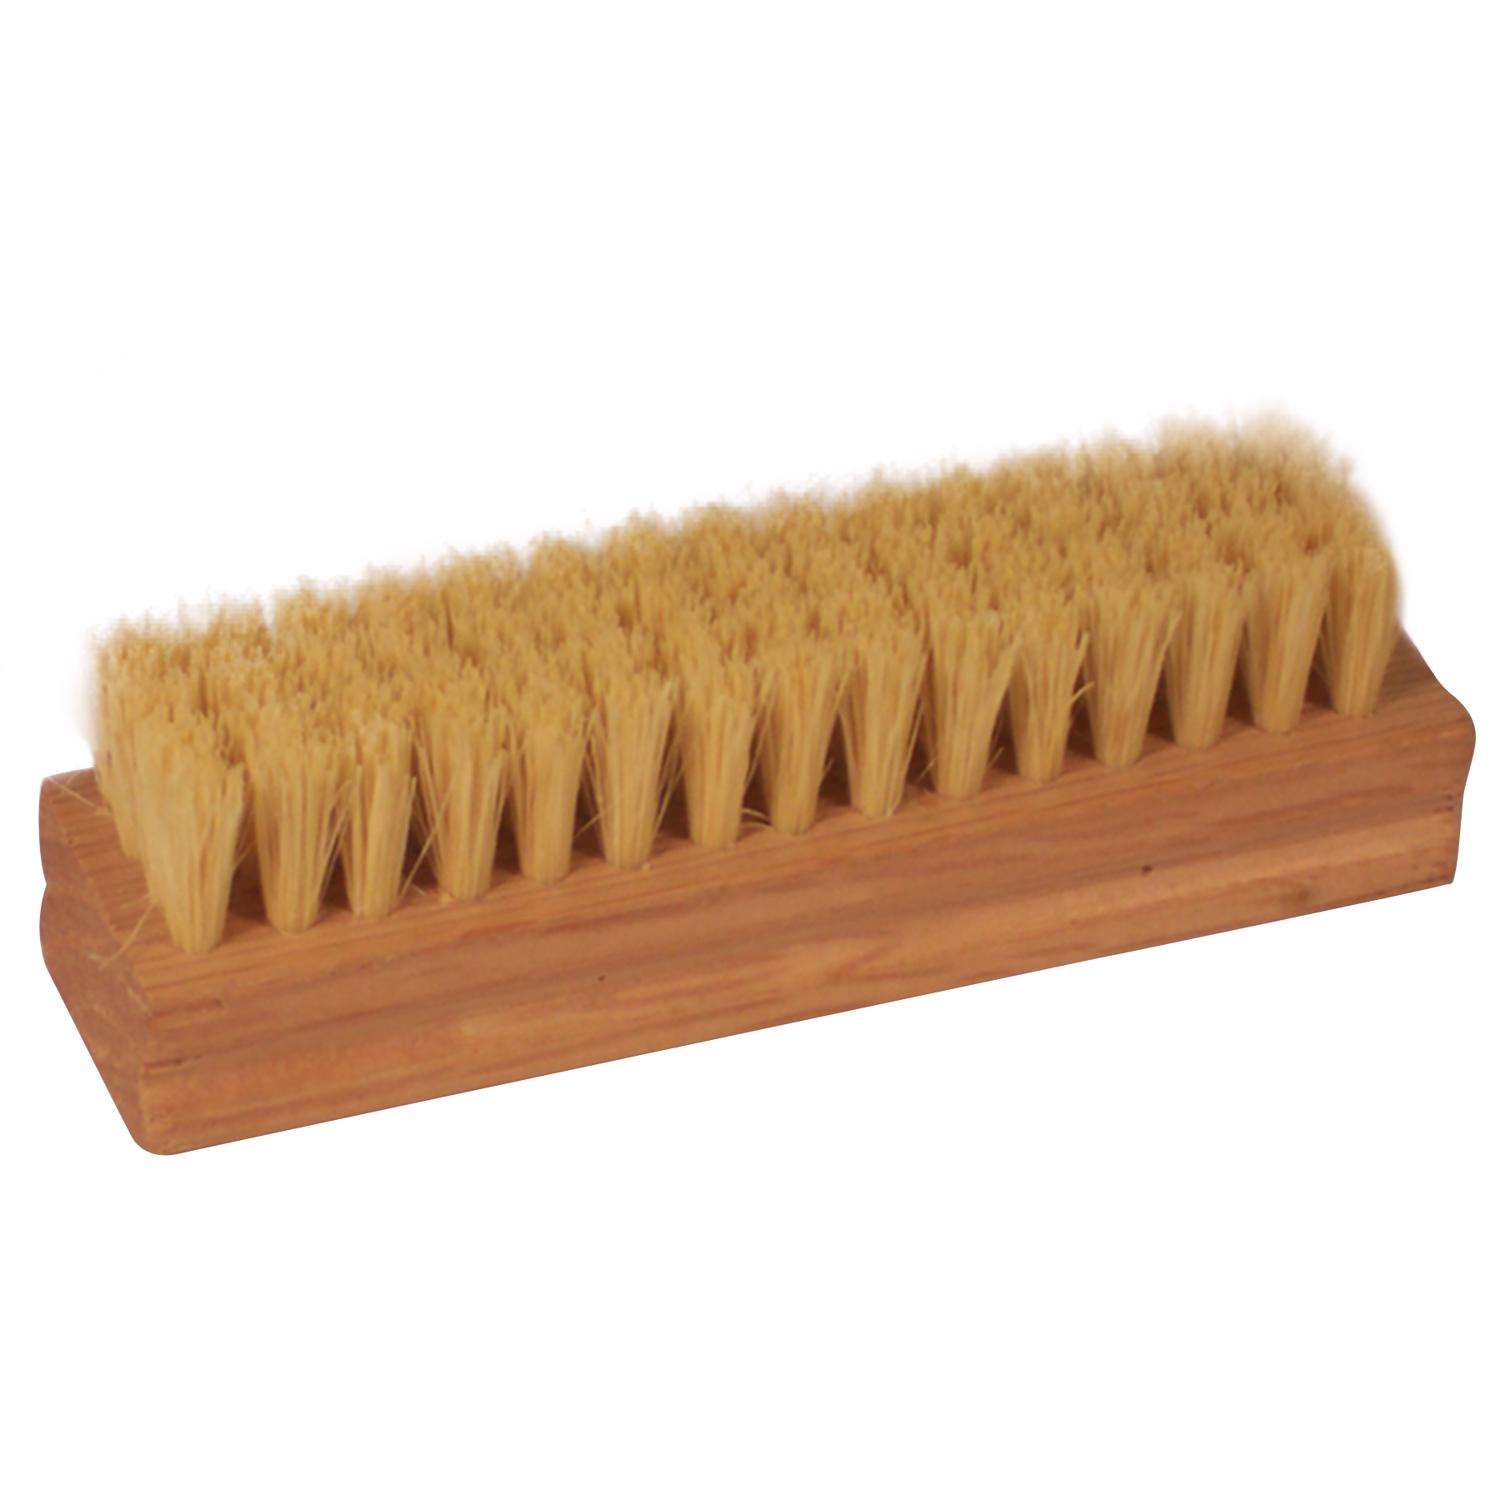 Expert Grill Soft Grip 3 in 1 Barbecue Cleaning Brush - Each